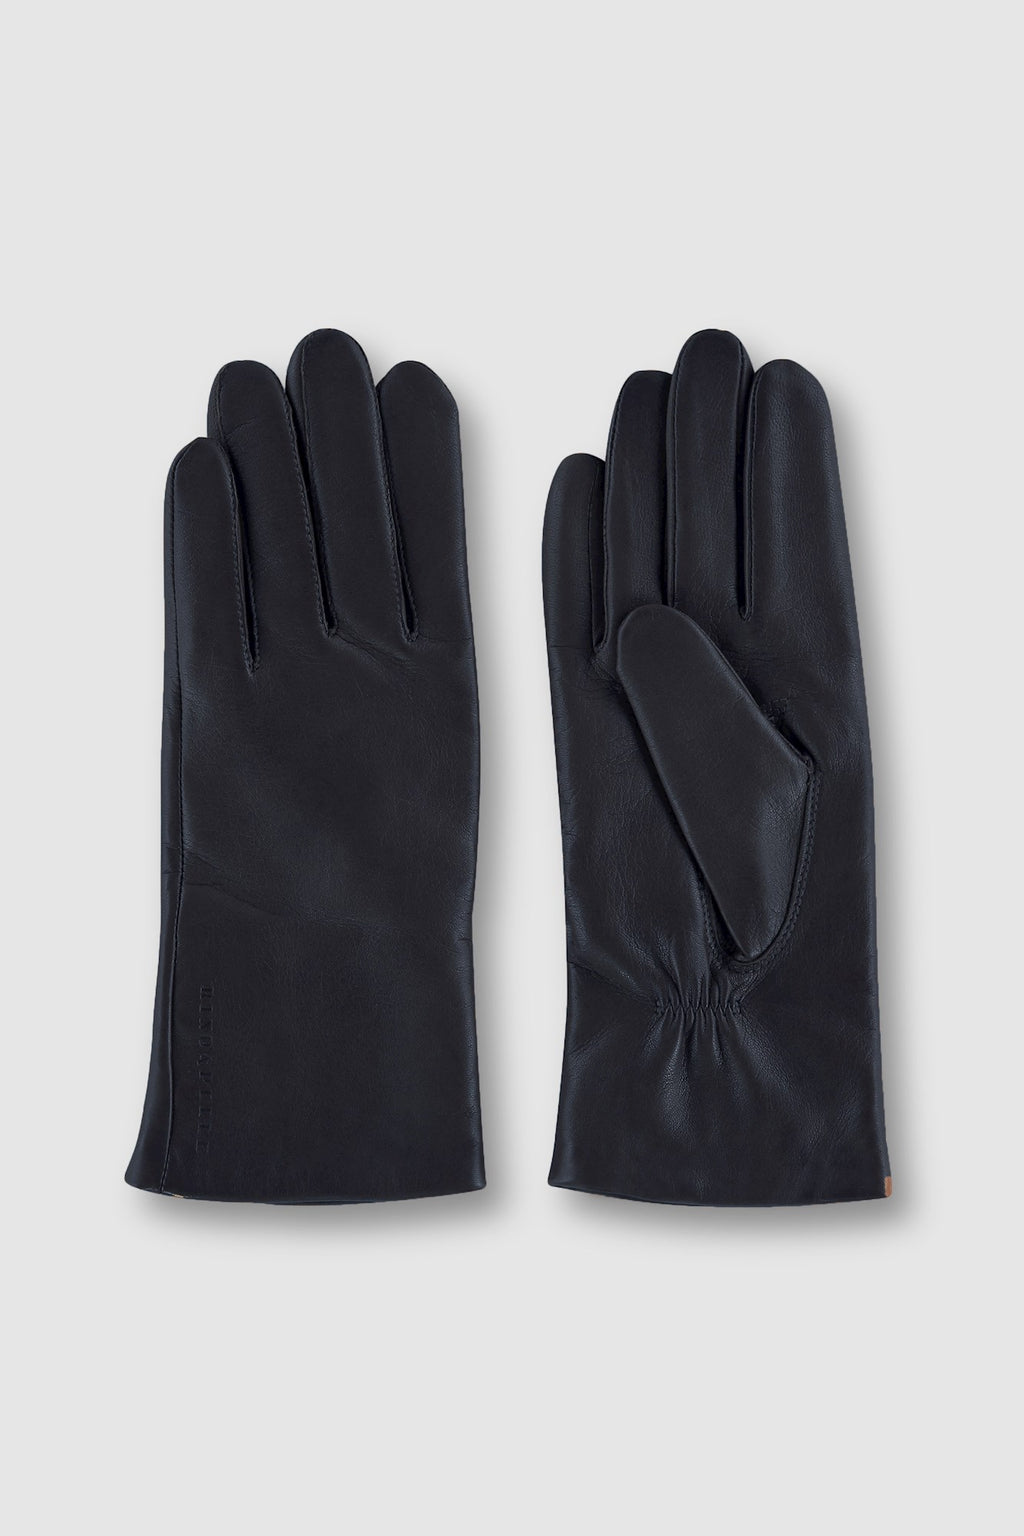 Rino & Pelle Gloves ANNICA Soft Lamb Leather Lined Navy